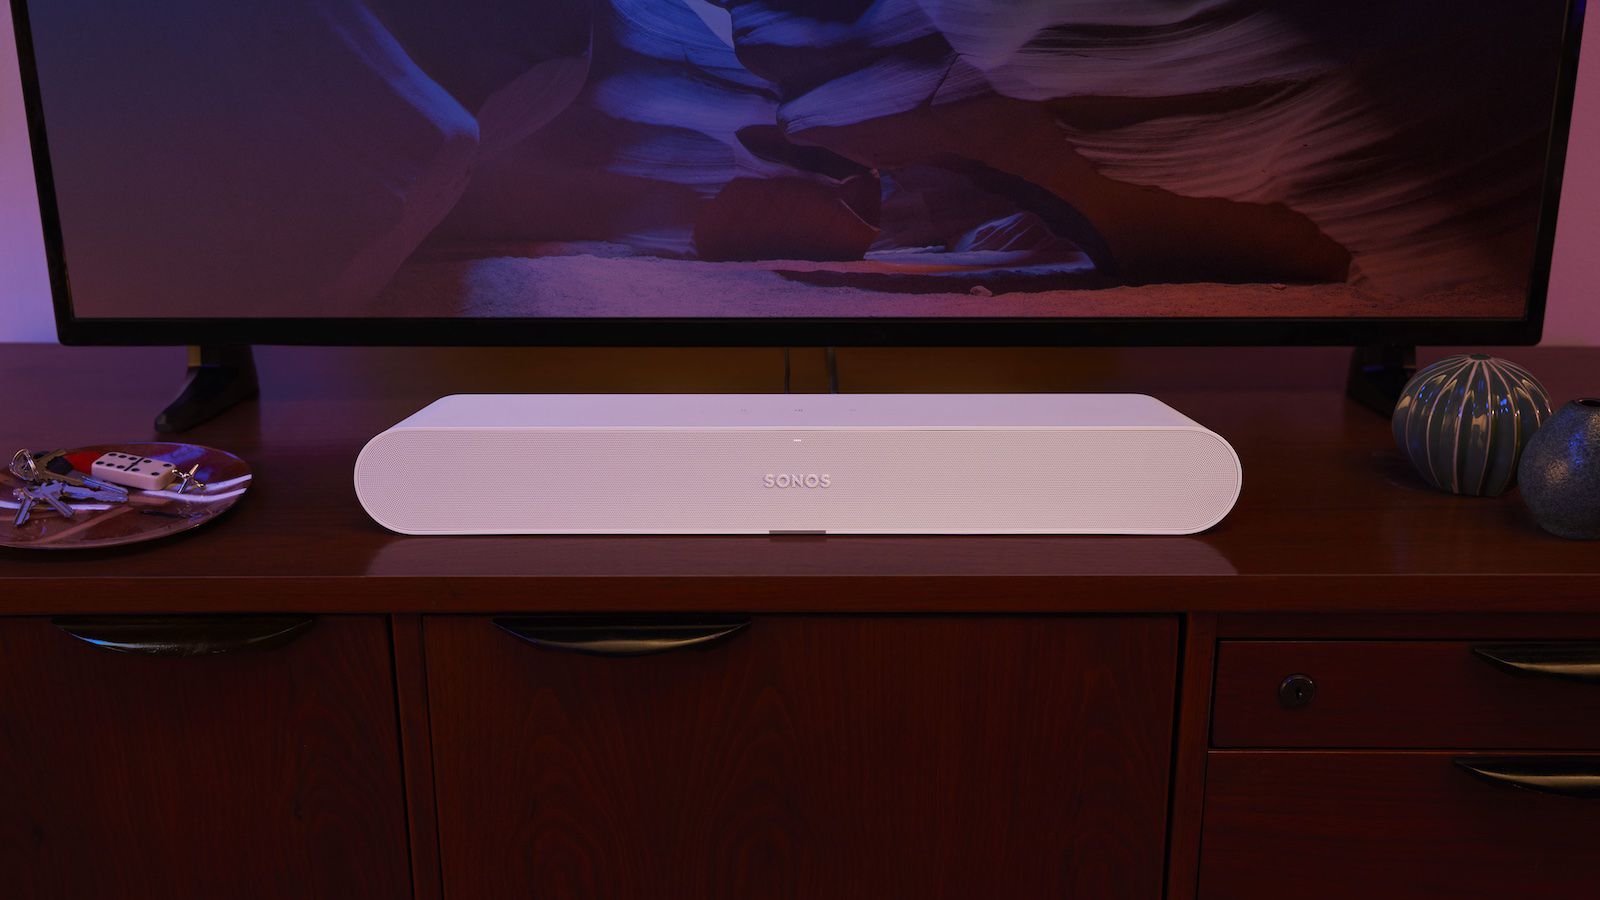 Sonos Announces Lower-Priced Soundbar With AirPlay 2 Support, 'Hey Sonos' Voice Control for Apple Music